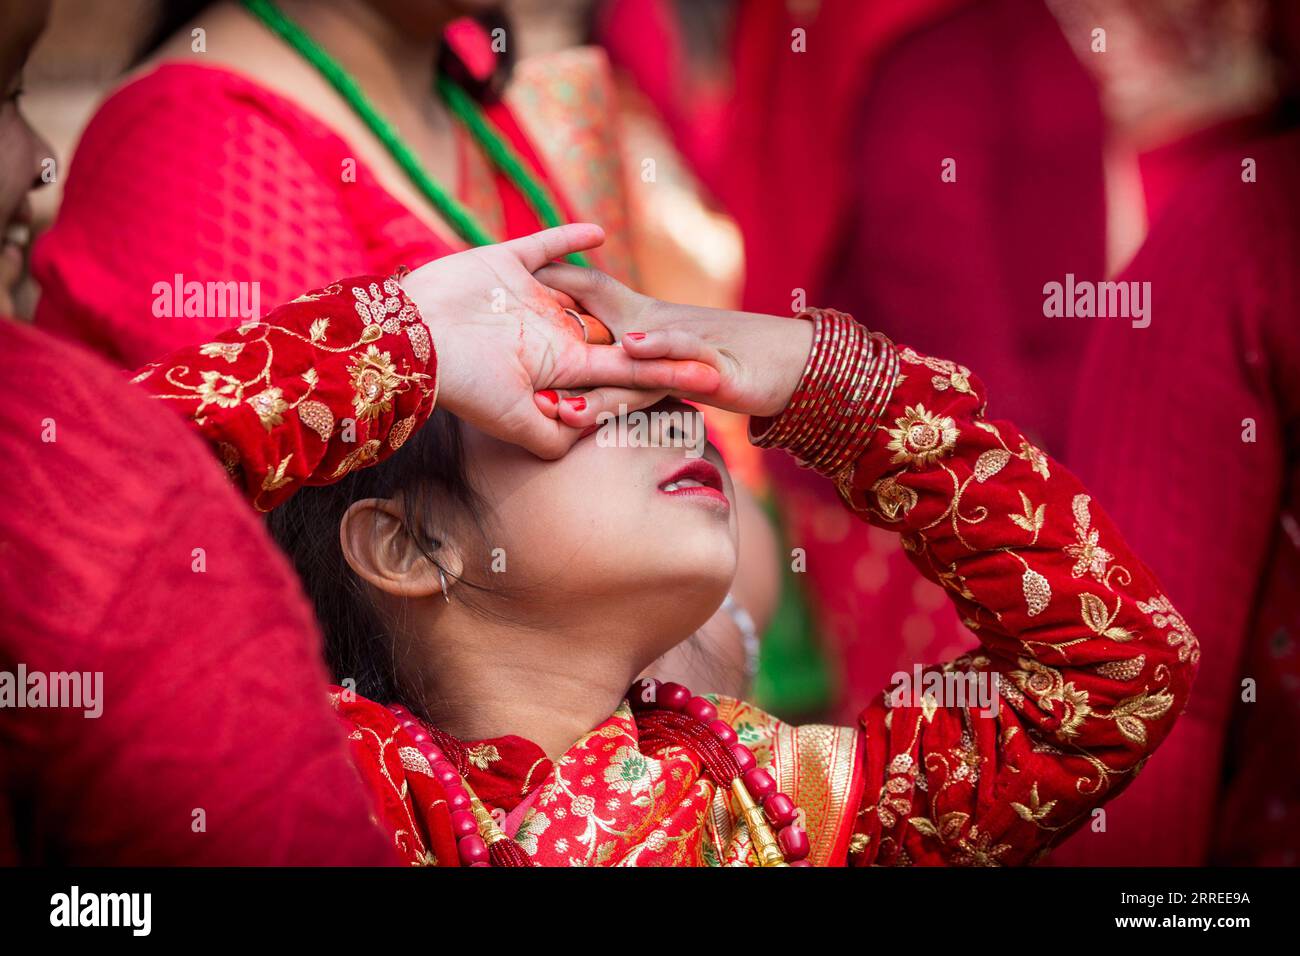 220223 -- LALITPUR, Feb. 23, 2022 -- A girl worships the Sun during a puberty ceremony known as Gufa in Lalitpur, Nepal, Feb. 23, 2022. Photo by /Xinhua NEPAL-LALITPUR-GUFA-PUBERTY CEREMONY HarixMaharjan PUBLICATIONxNOTxINxCHN Stock Photo